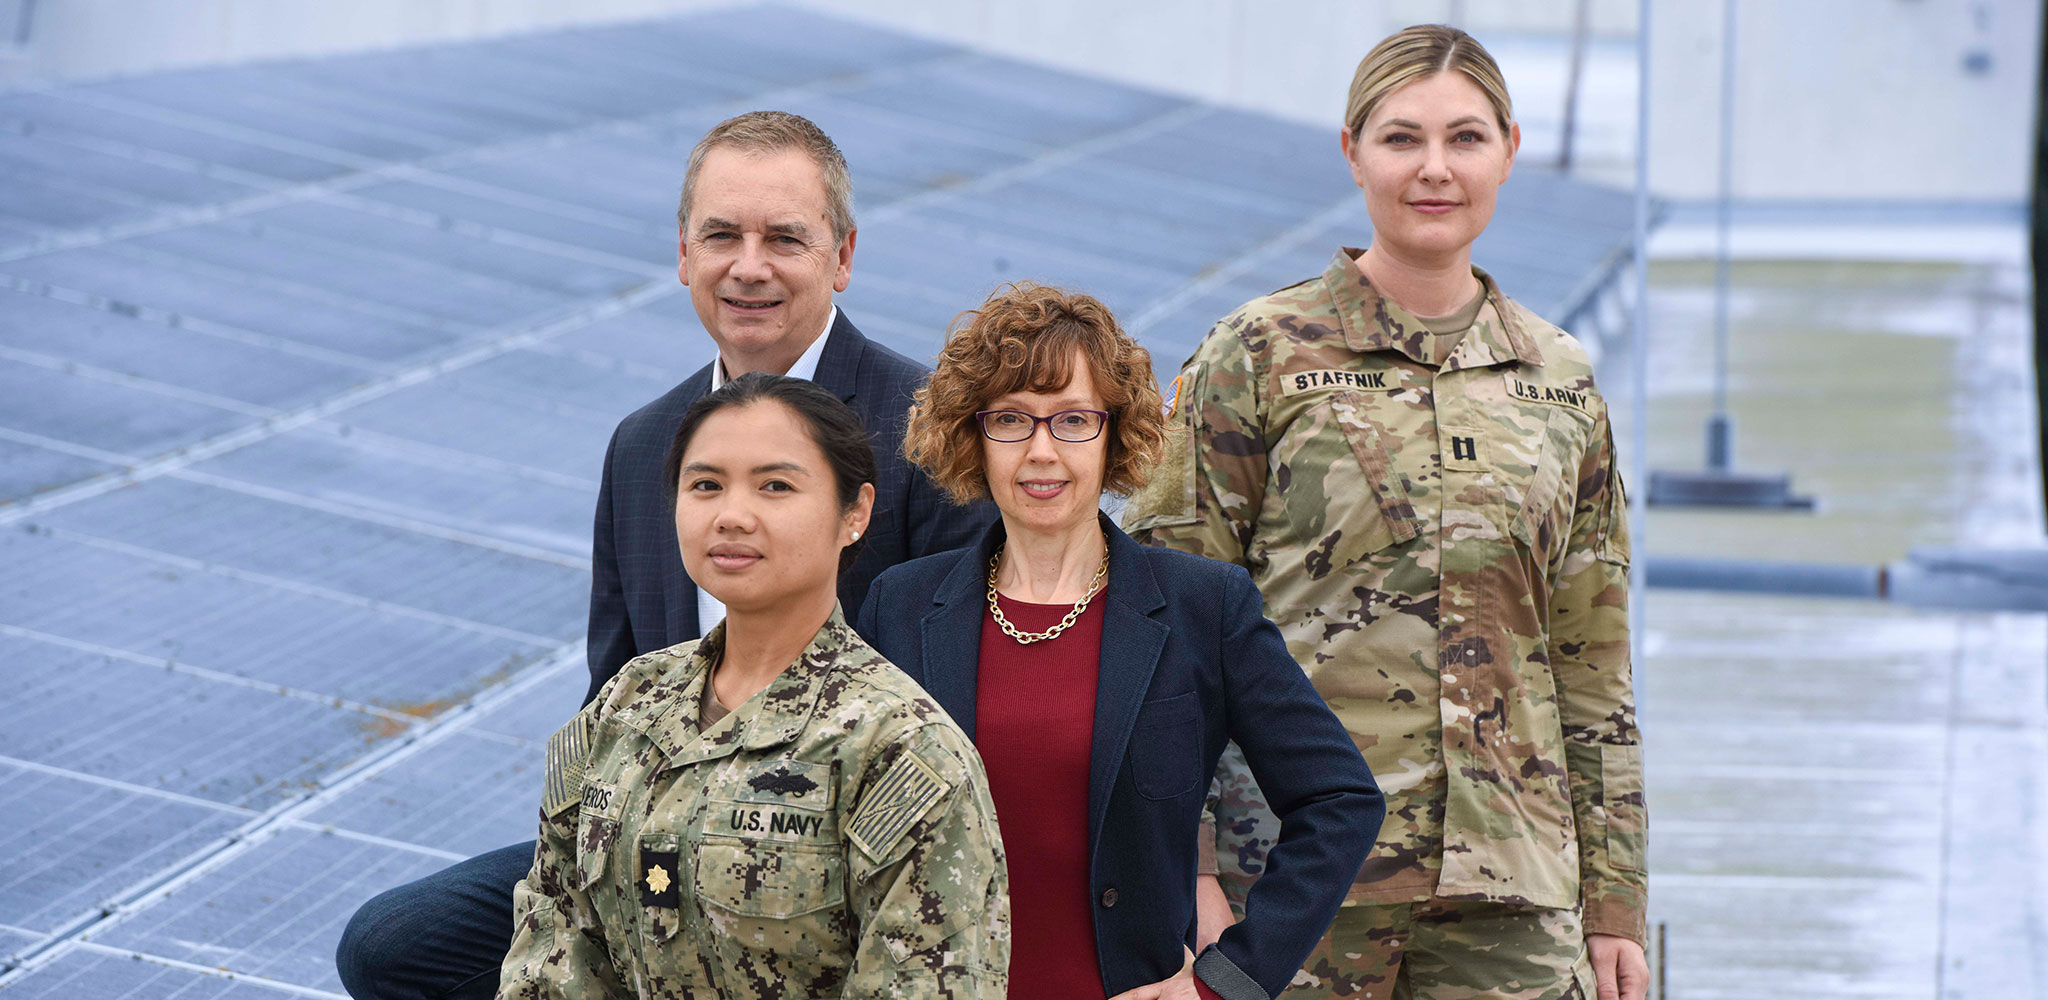 NPS Professor Dr. Giovanna Oritistands with team members U.S. Navy Lt. Cmdr. Olive Oliveros, NPS Professor Dr. Ron Giachetti and U.S. Army Capt. Abigail Staffnik.